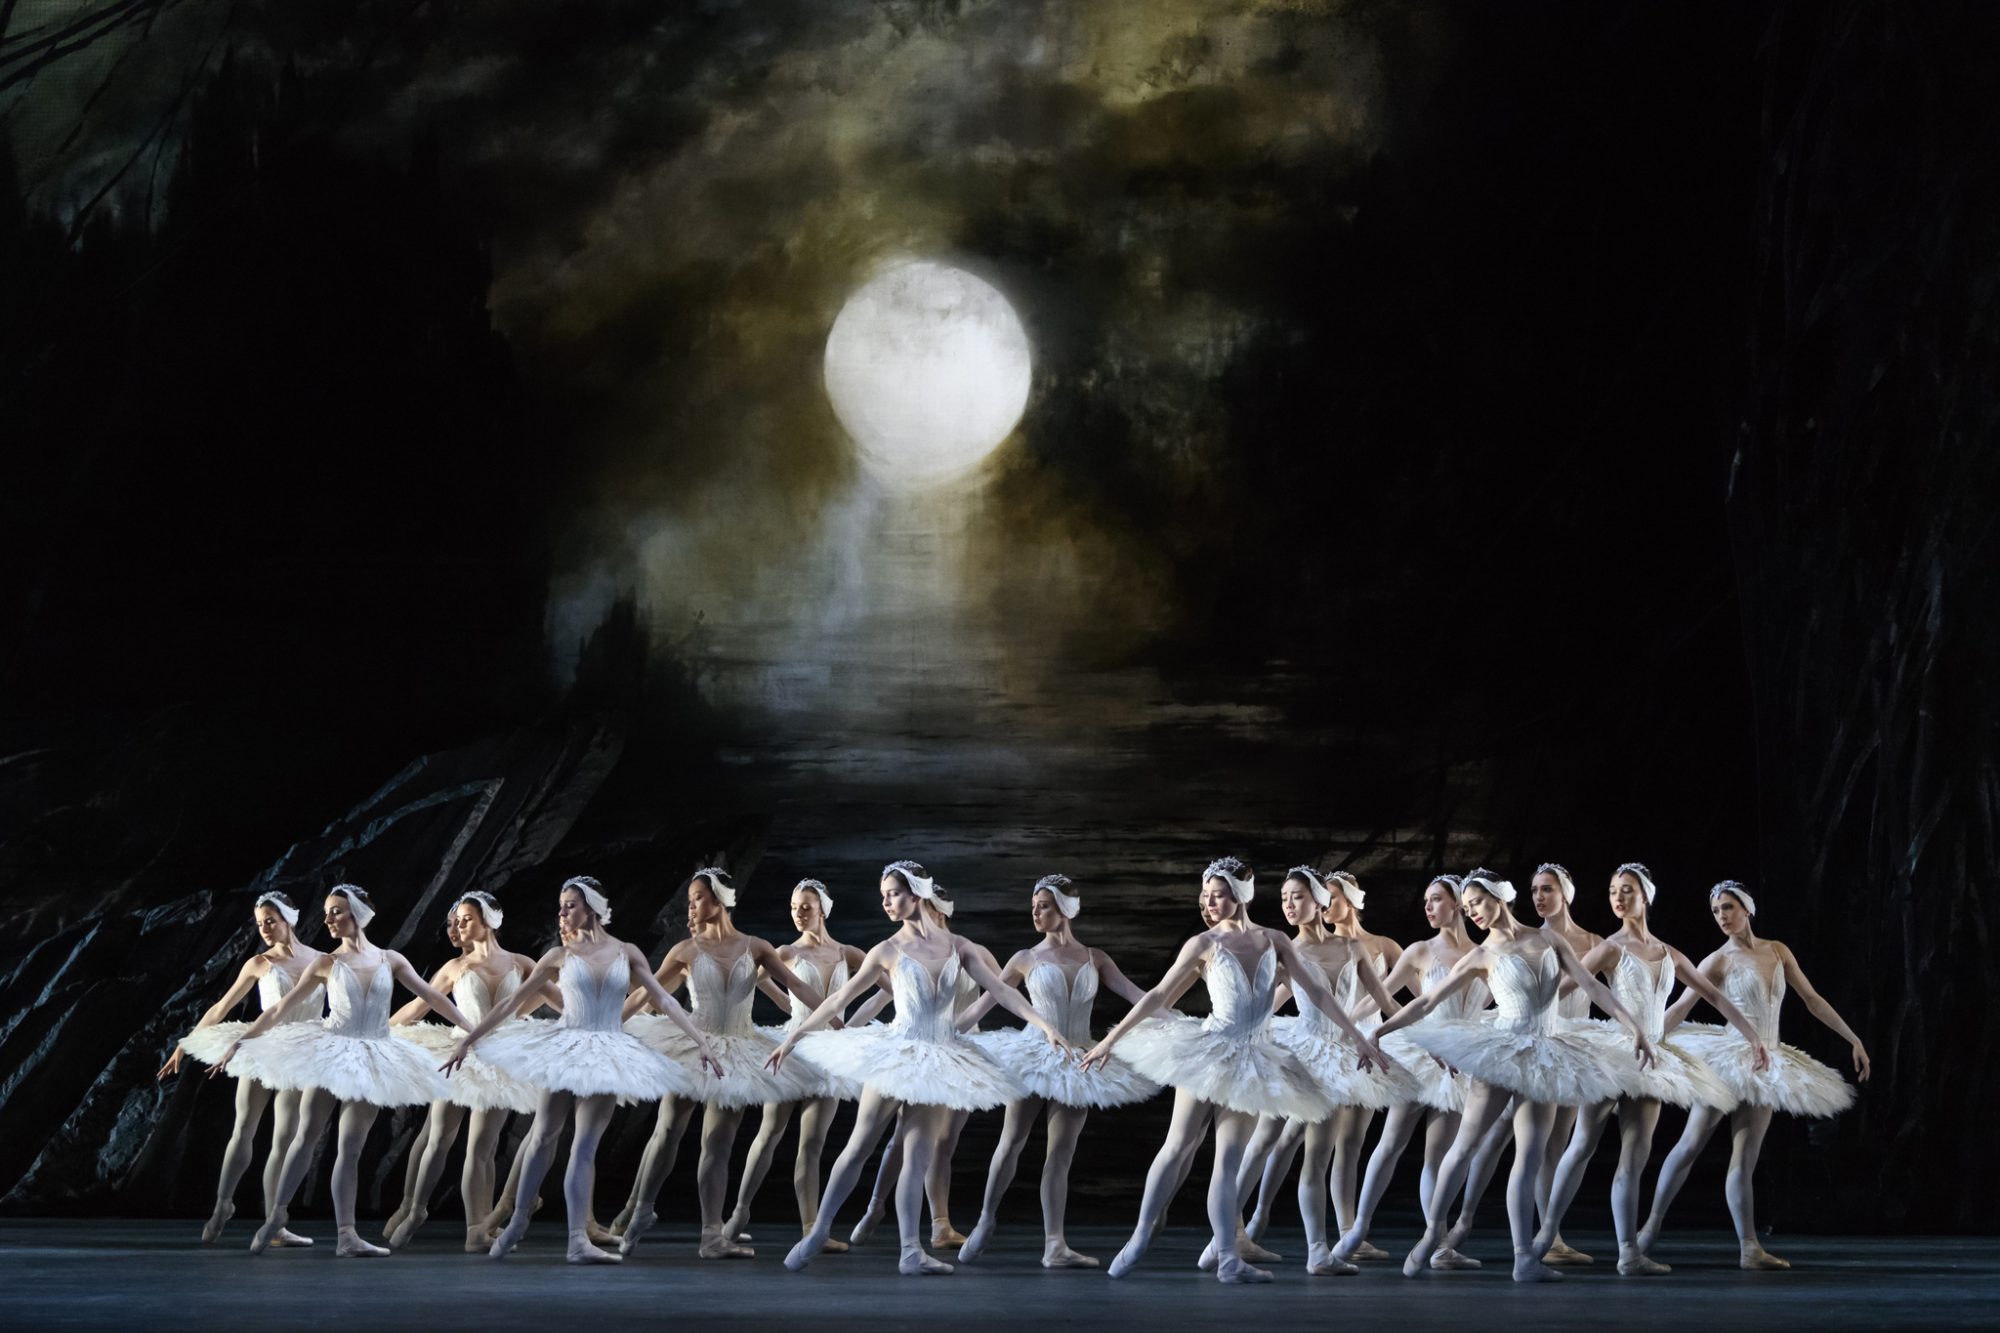 Ballet dances dressed in white leotards and tu-tus under a full moon.